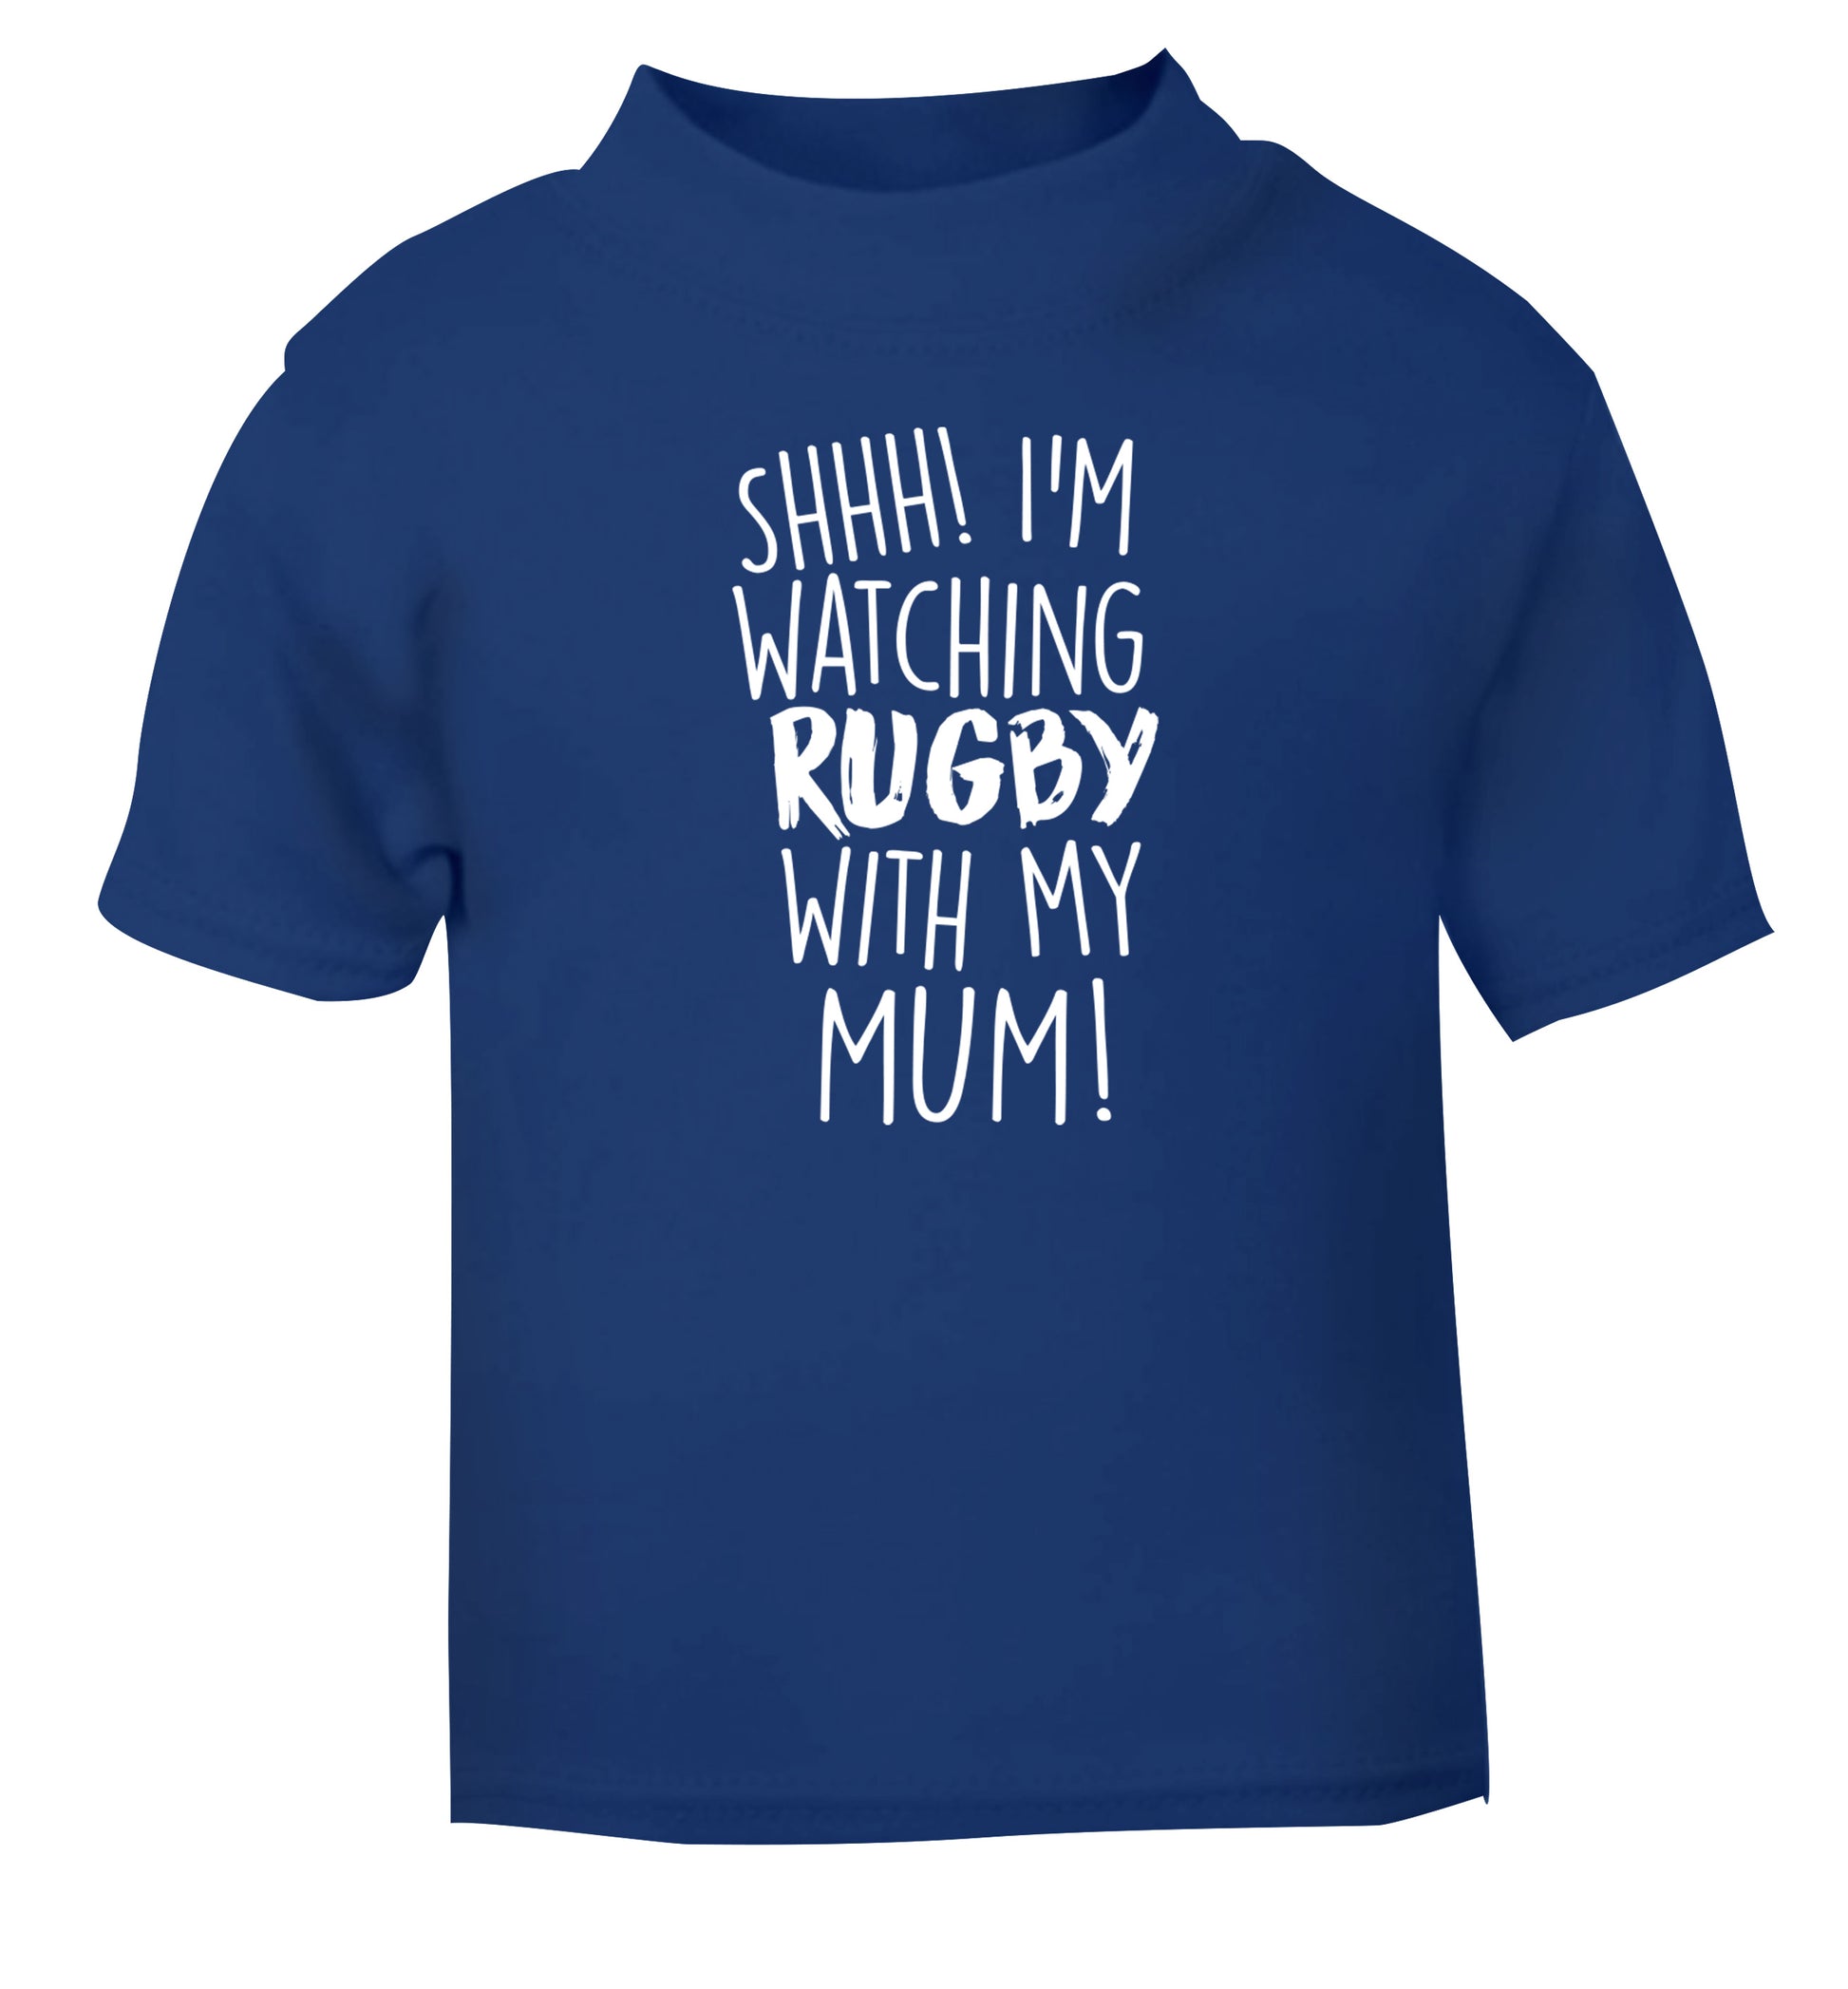 Shh... I'm watching rugby with my mum blue Baby Toddler Tshirt 2 Years